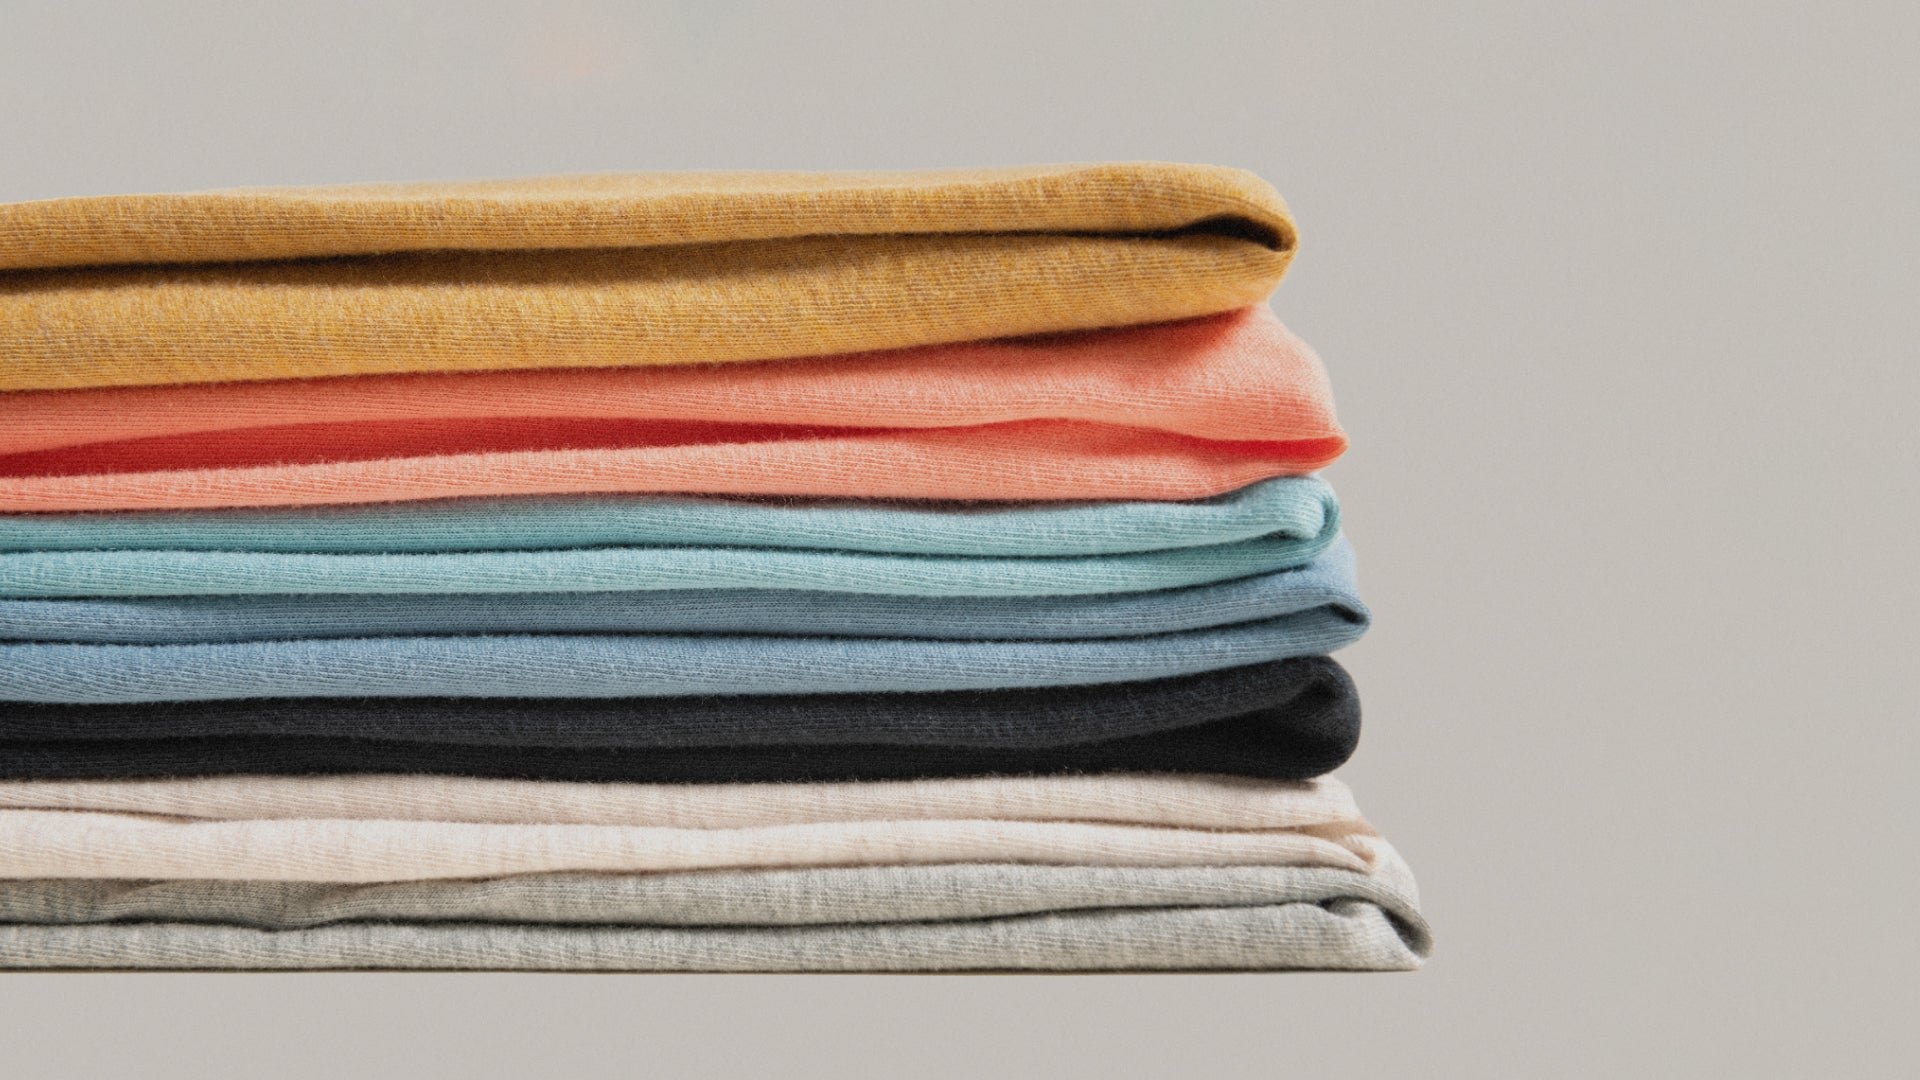 A neatly folded stack of different colored SAXX shirts on a neutral background.